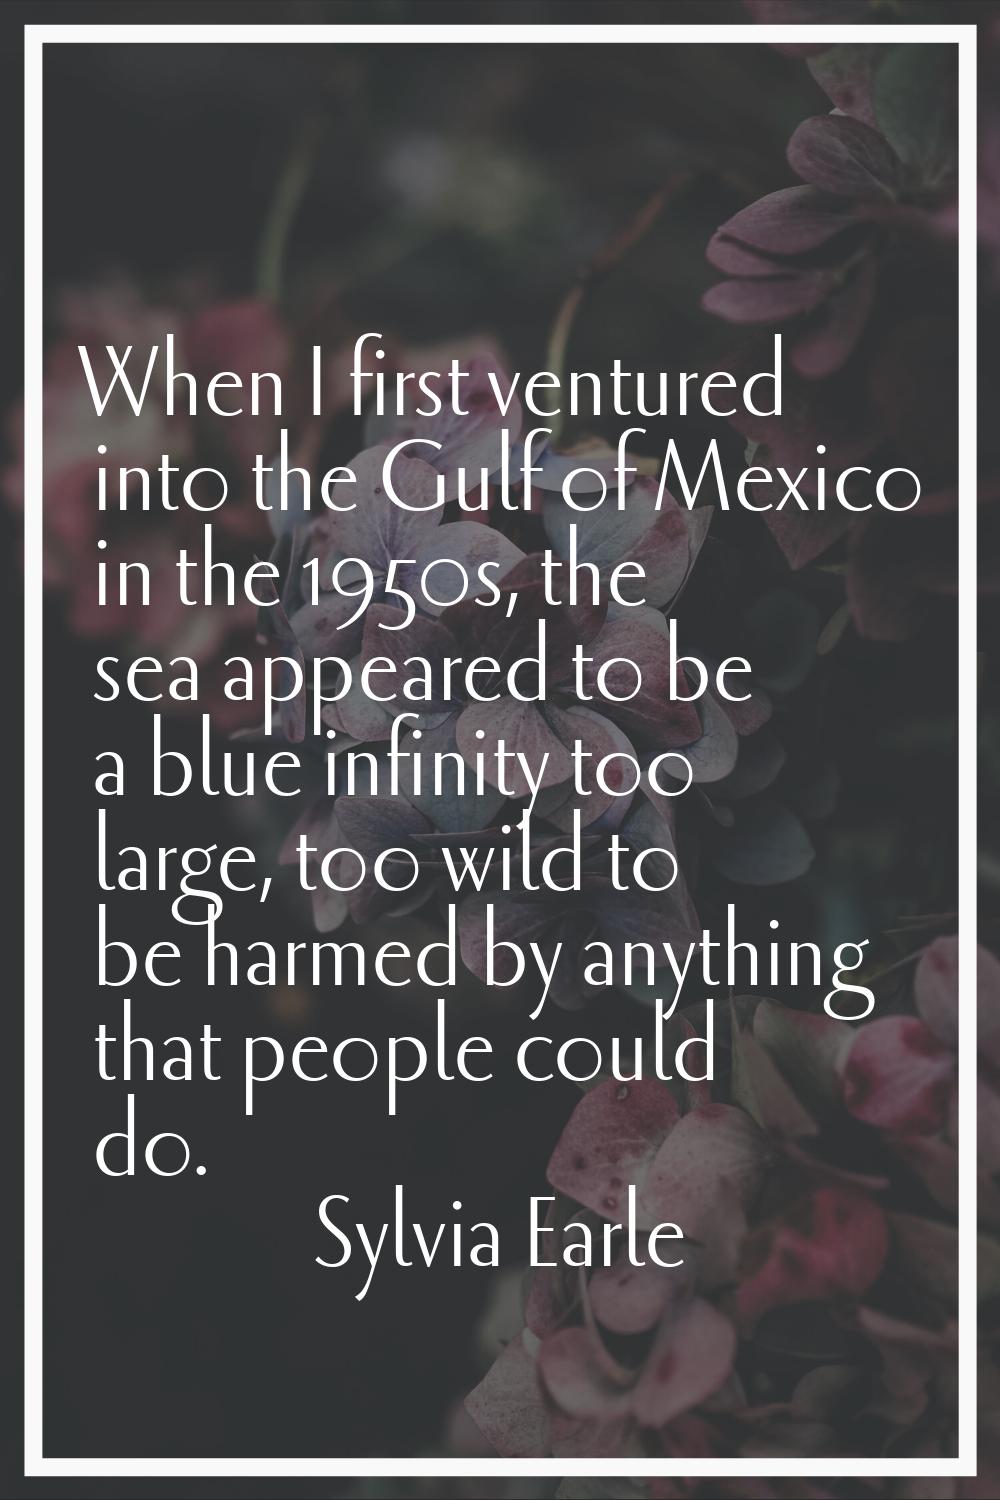 When I first ventured into the Gulf of Mexico in the 1950s, the sea appeared to be a blue infinity 